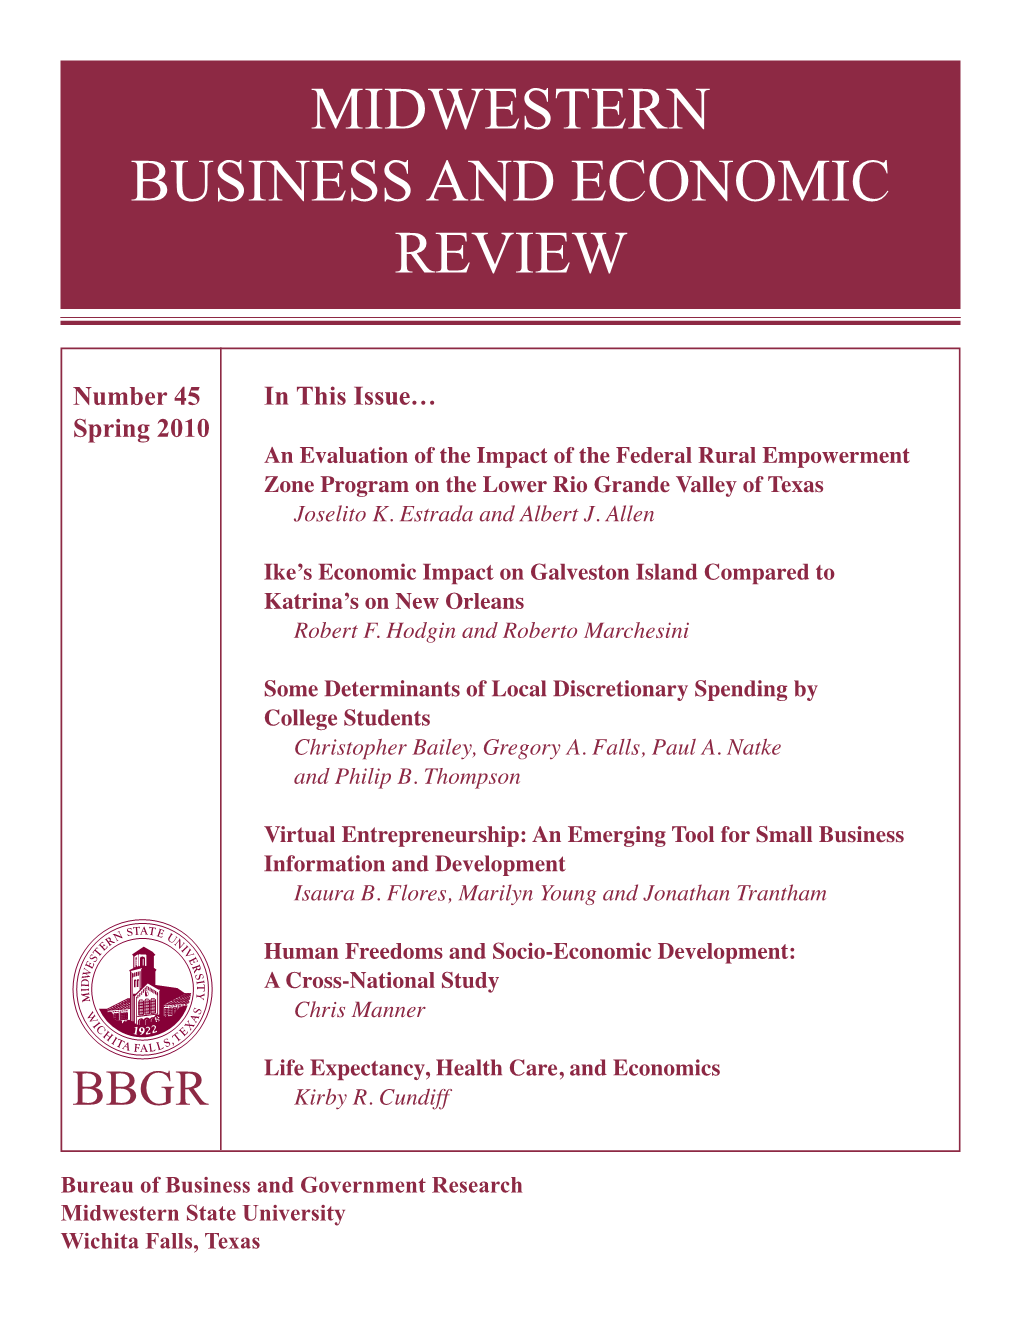 Midwestern Business and Economic Review